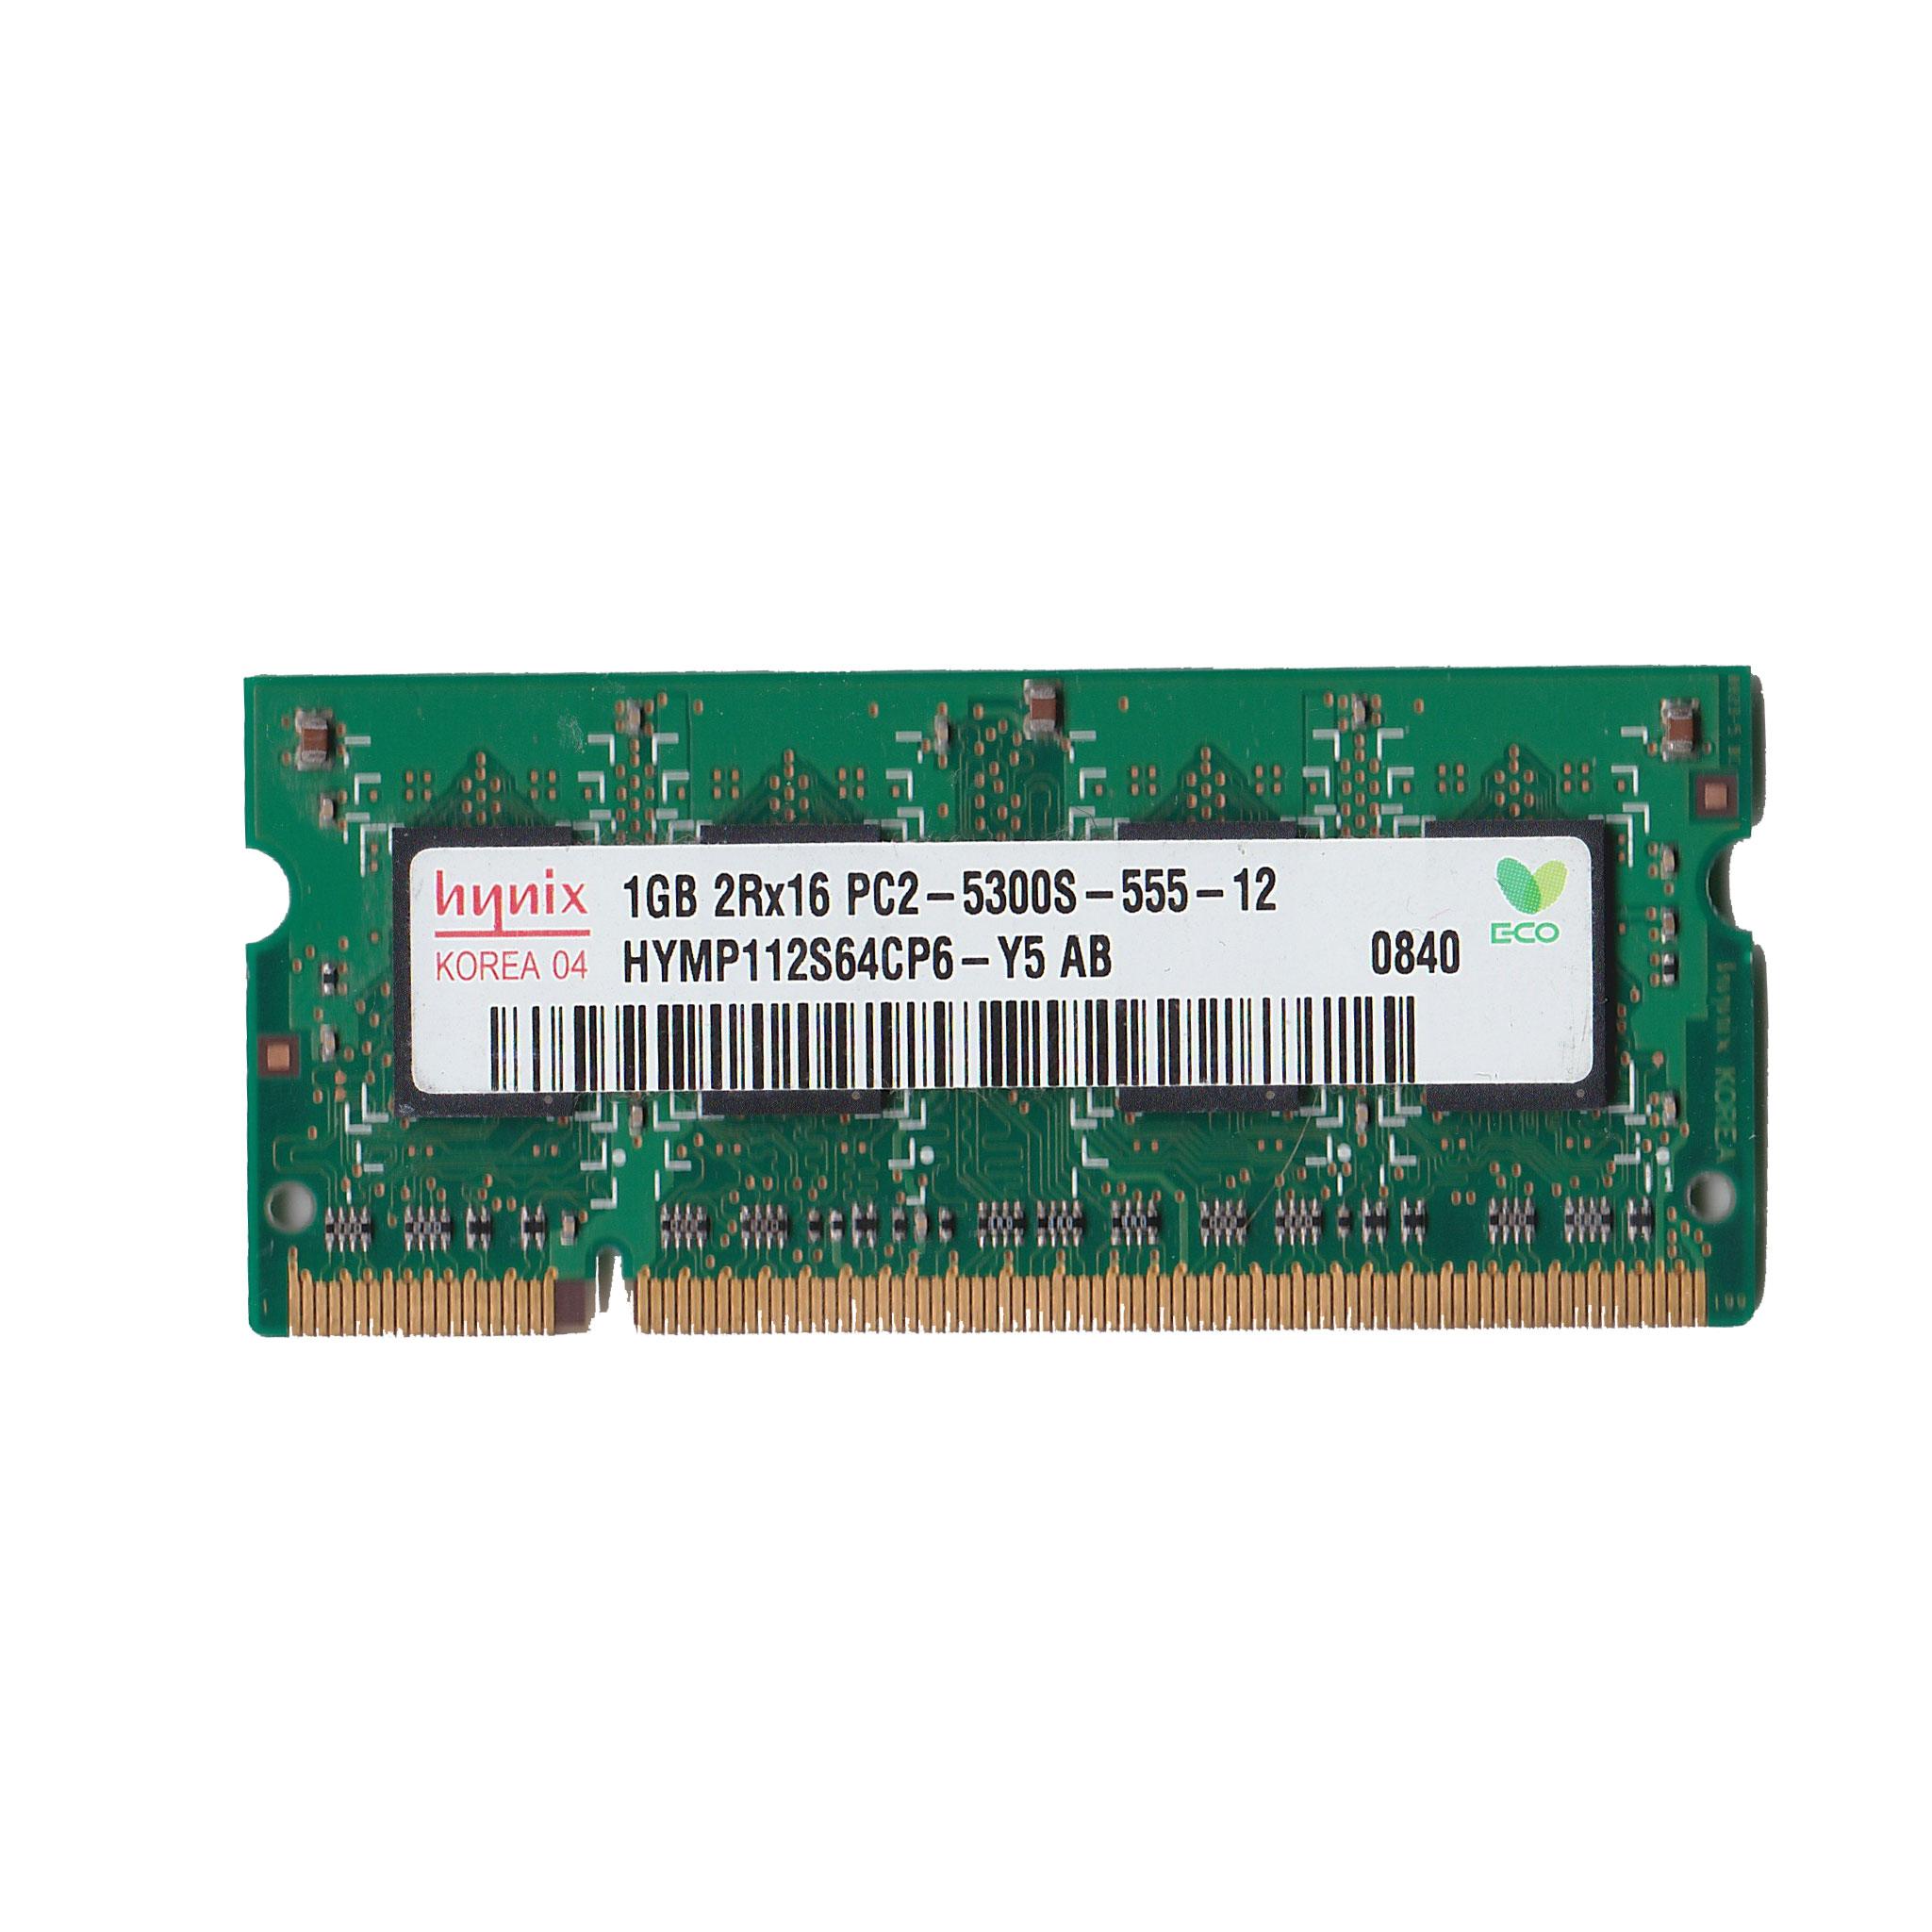 Untested Preowned HYNIX 2RX16 PC2-5300S-555-12 AB 1GB Laptop Memory Module - Performance and Value